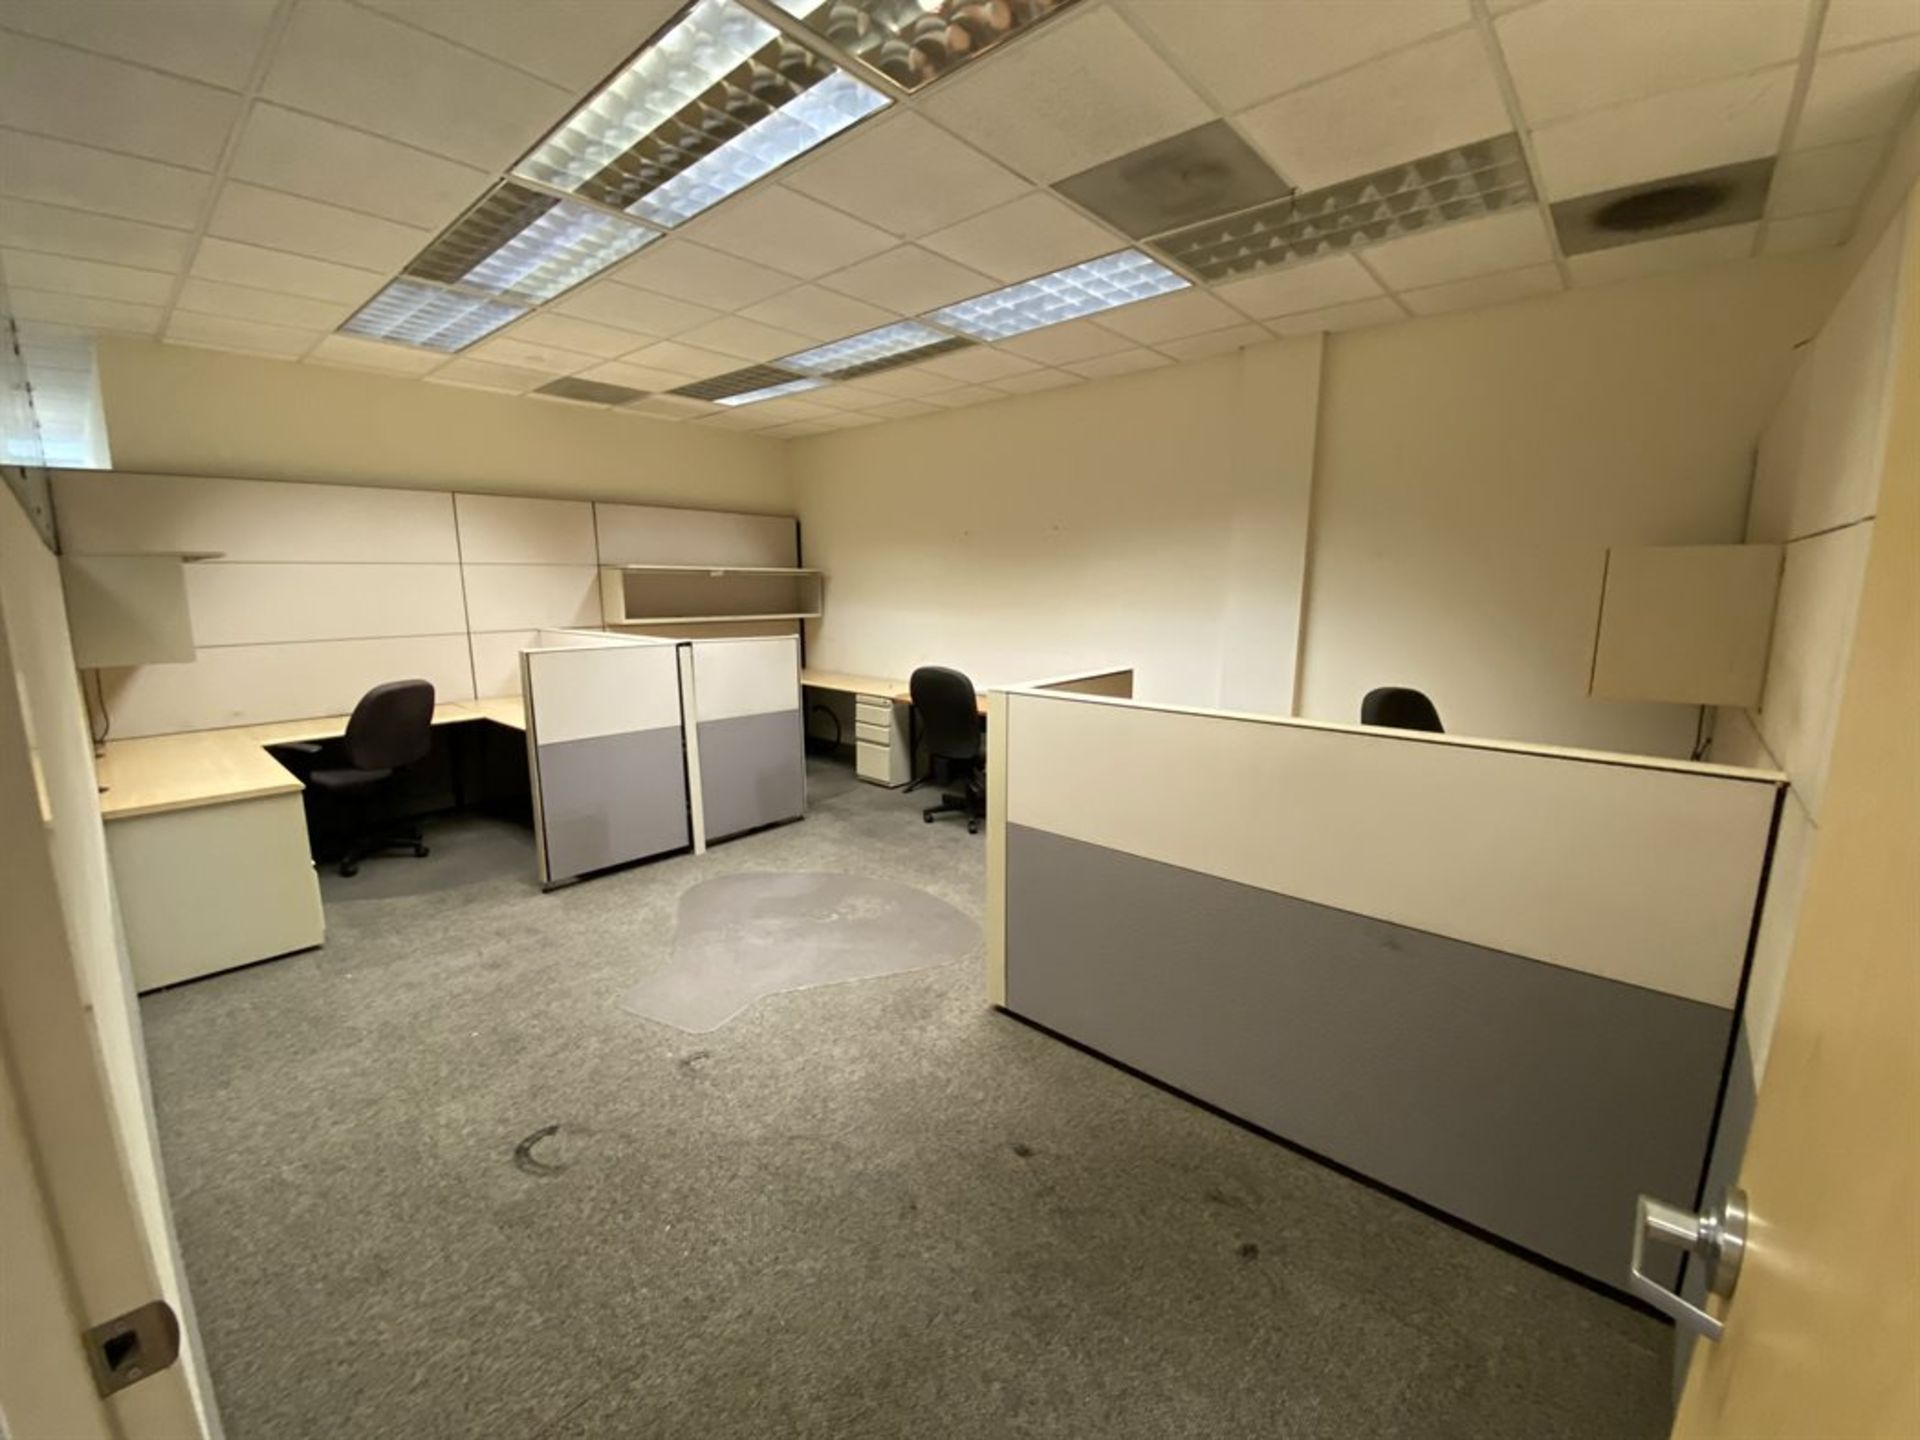 Approximately 40 Office Cubicles - Image 6 of 7